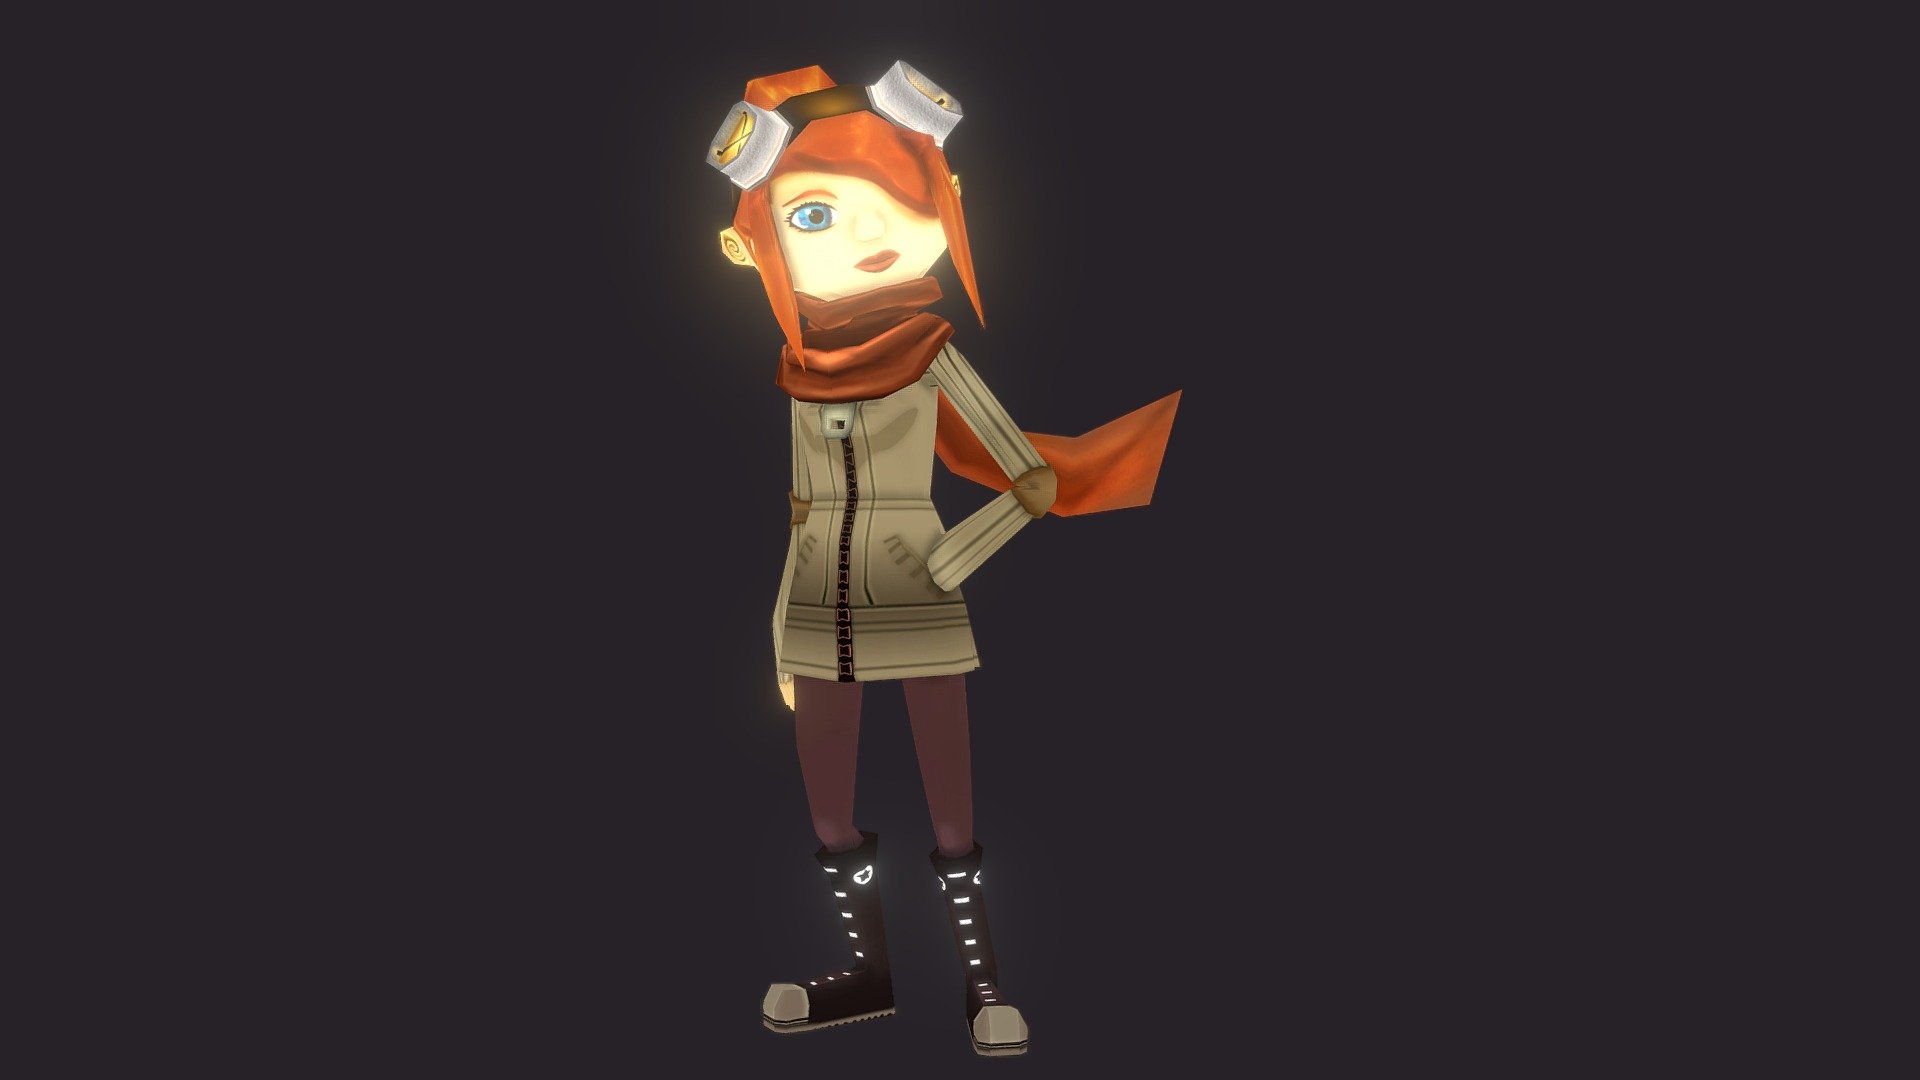 Low-poly character concept model reconceptualization based on a concept design by artist Max Gon / Art of Gon 3d model